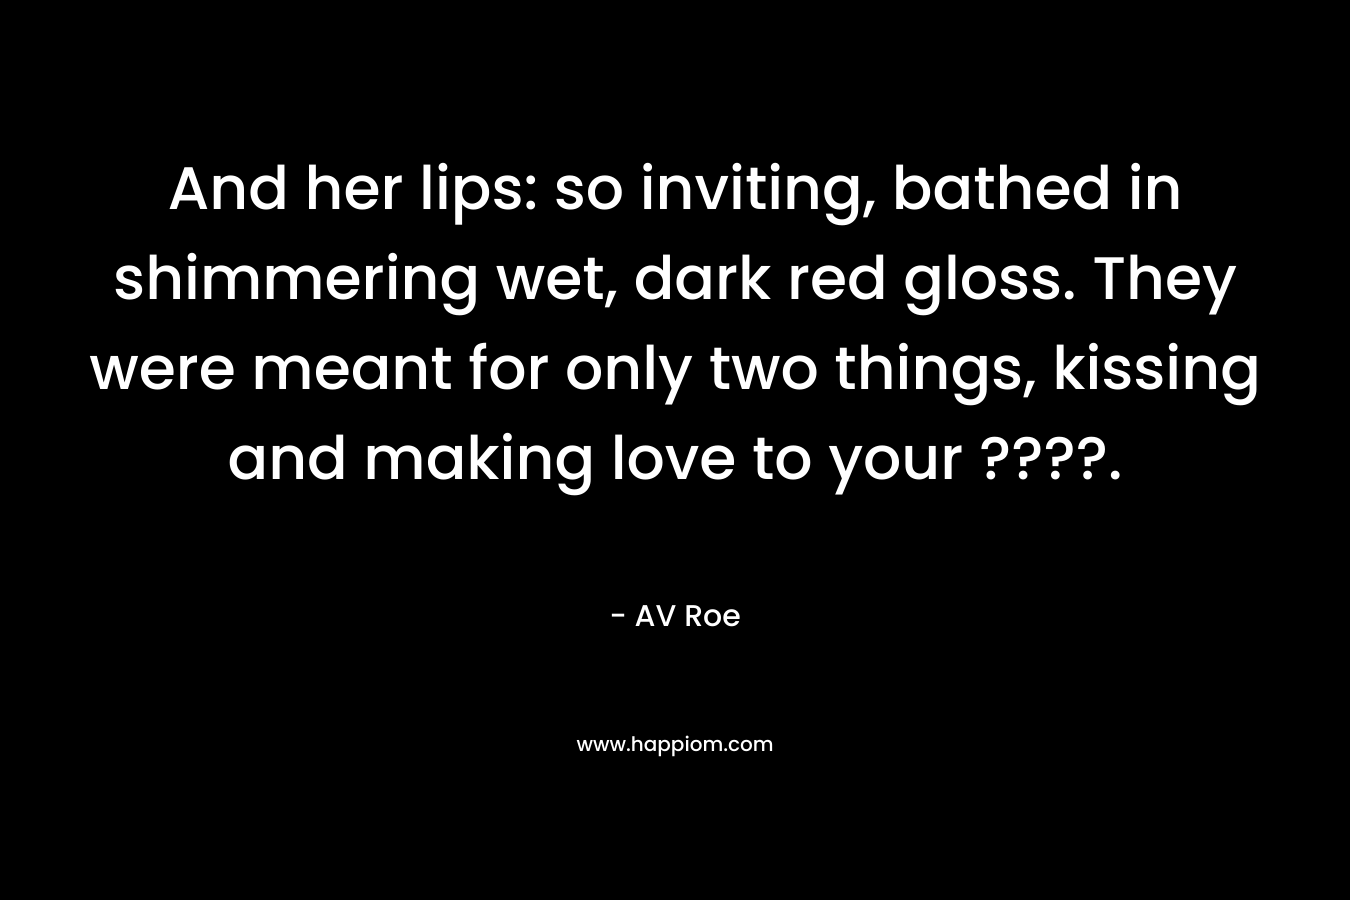 And her lips: so inviting, bathed in shimmering wet, dark red gloss. They were meant for only two things, kissing and making love to your ????.